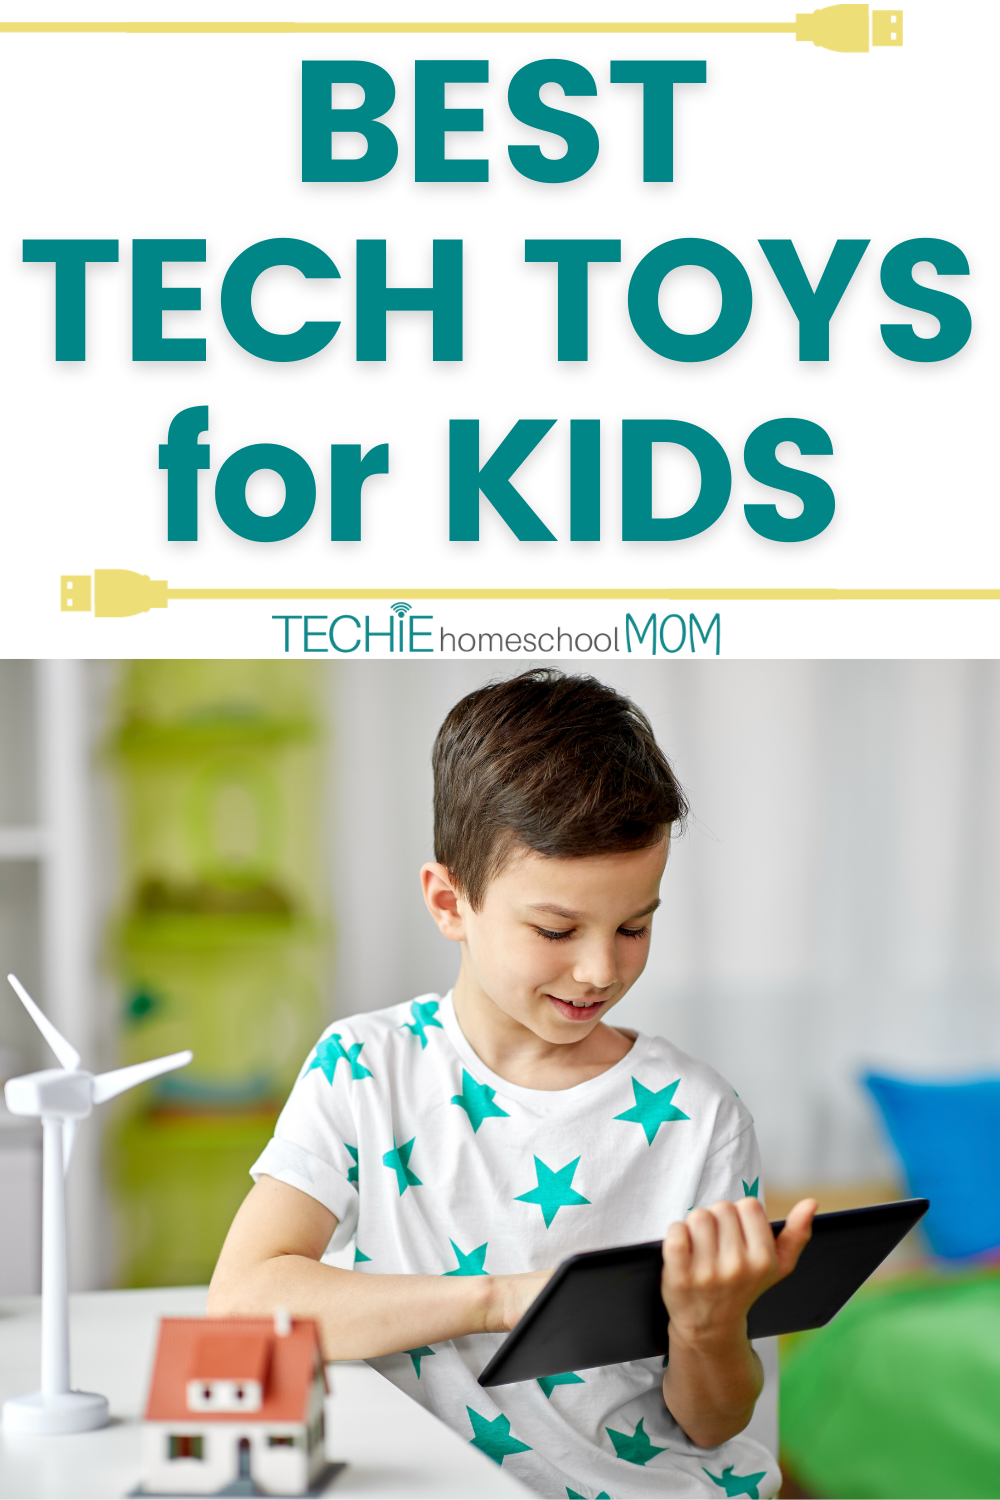 Looking for the best tech toys for kids? This list will give you some ideas for presents any kid will love.